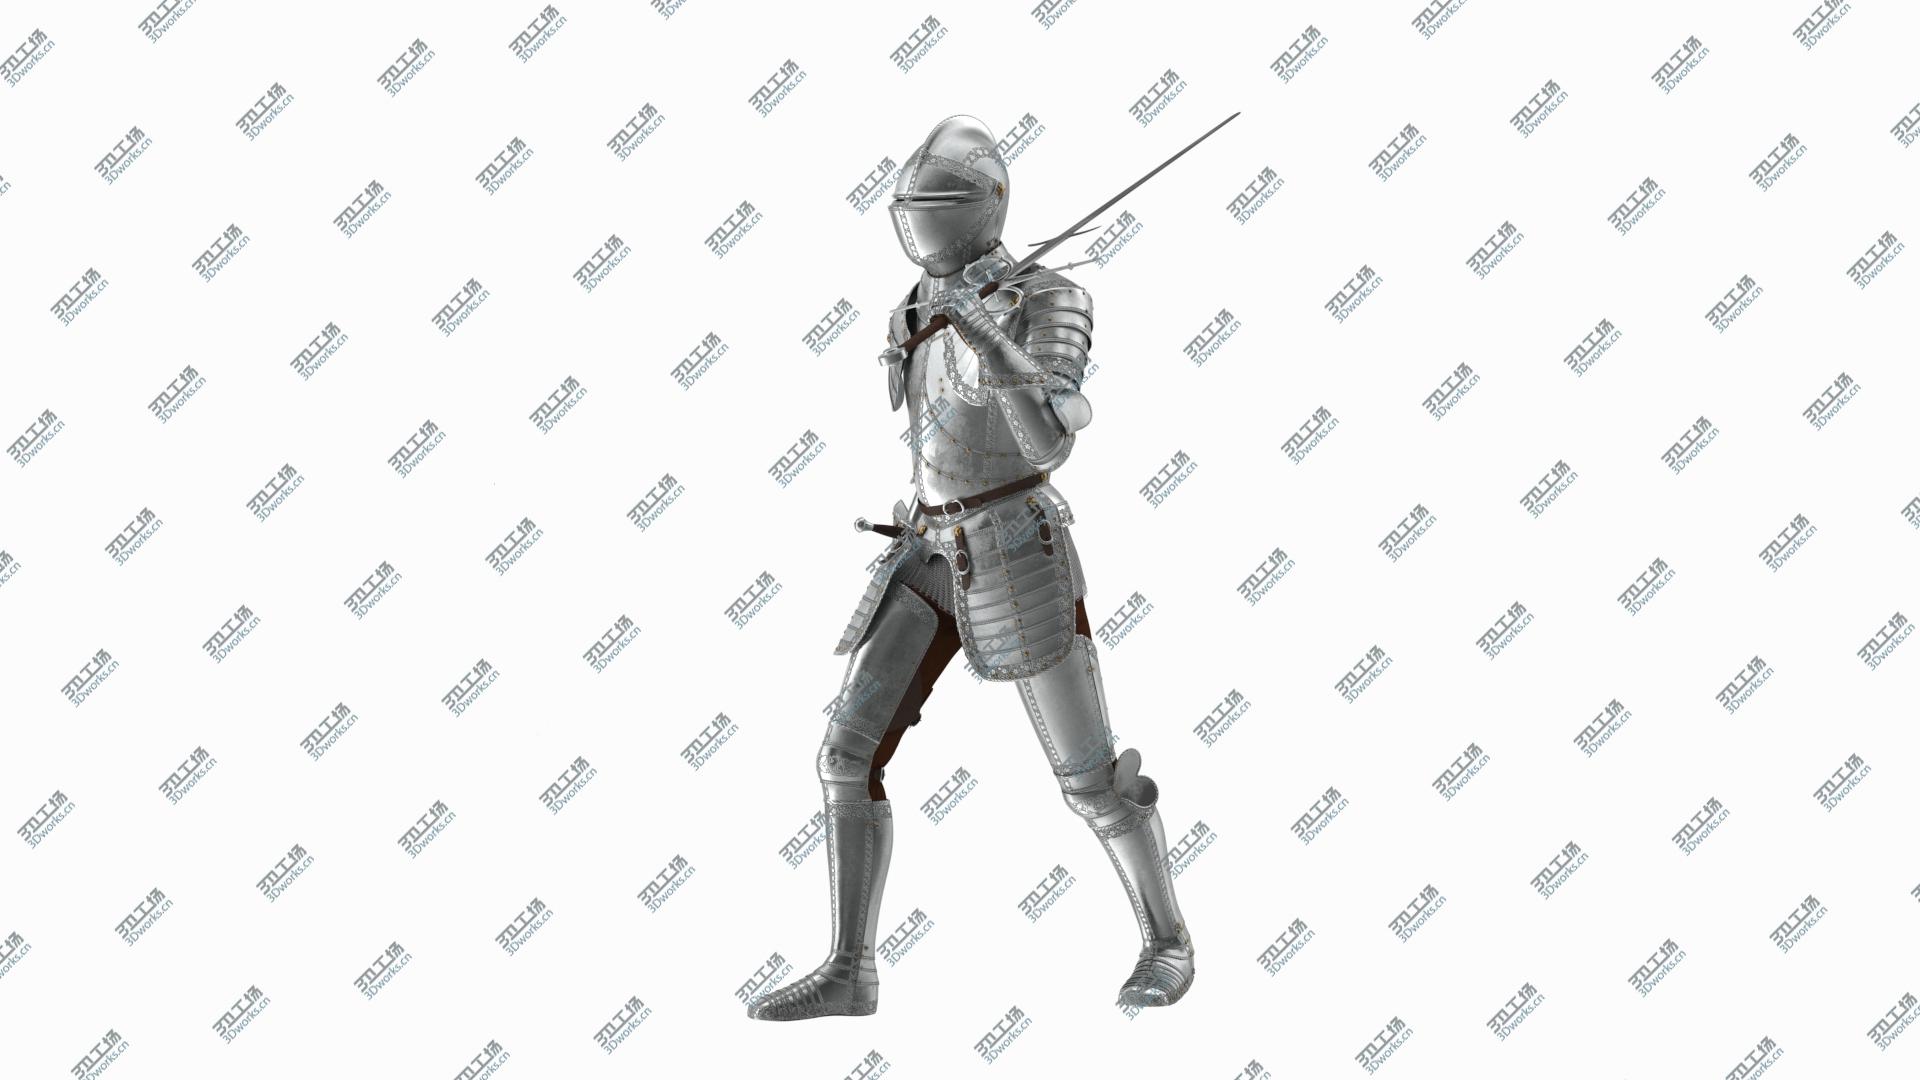 images/goods_img/20210313/3D Polished Knight Plate Armor Walking Pose/3.jpg